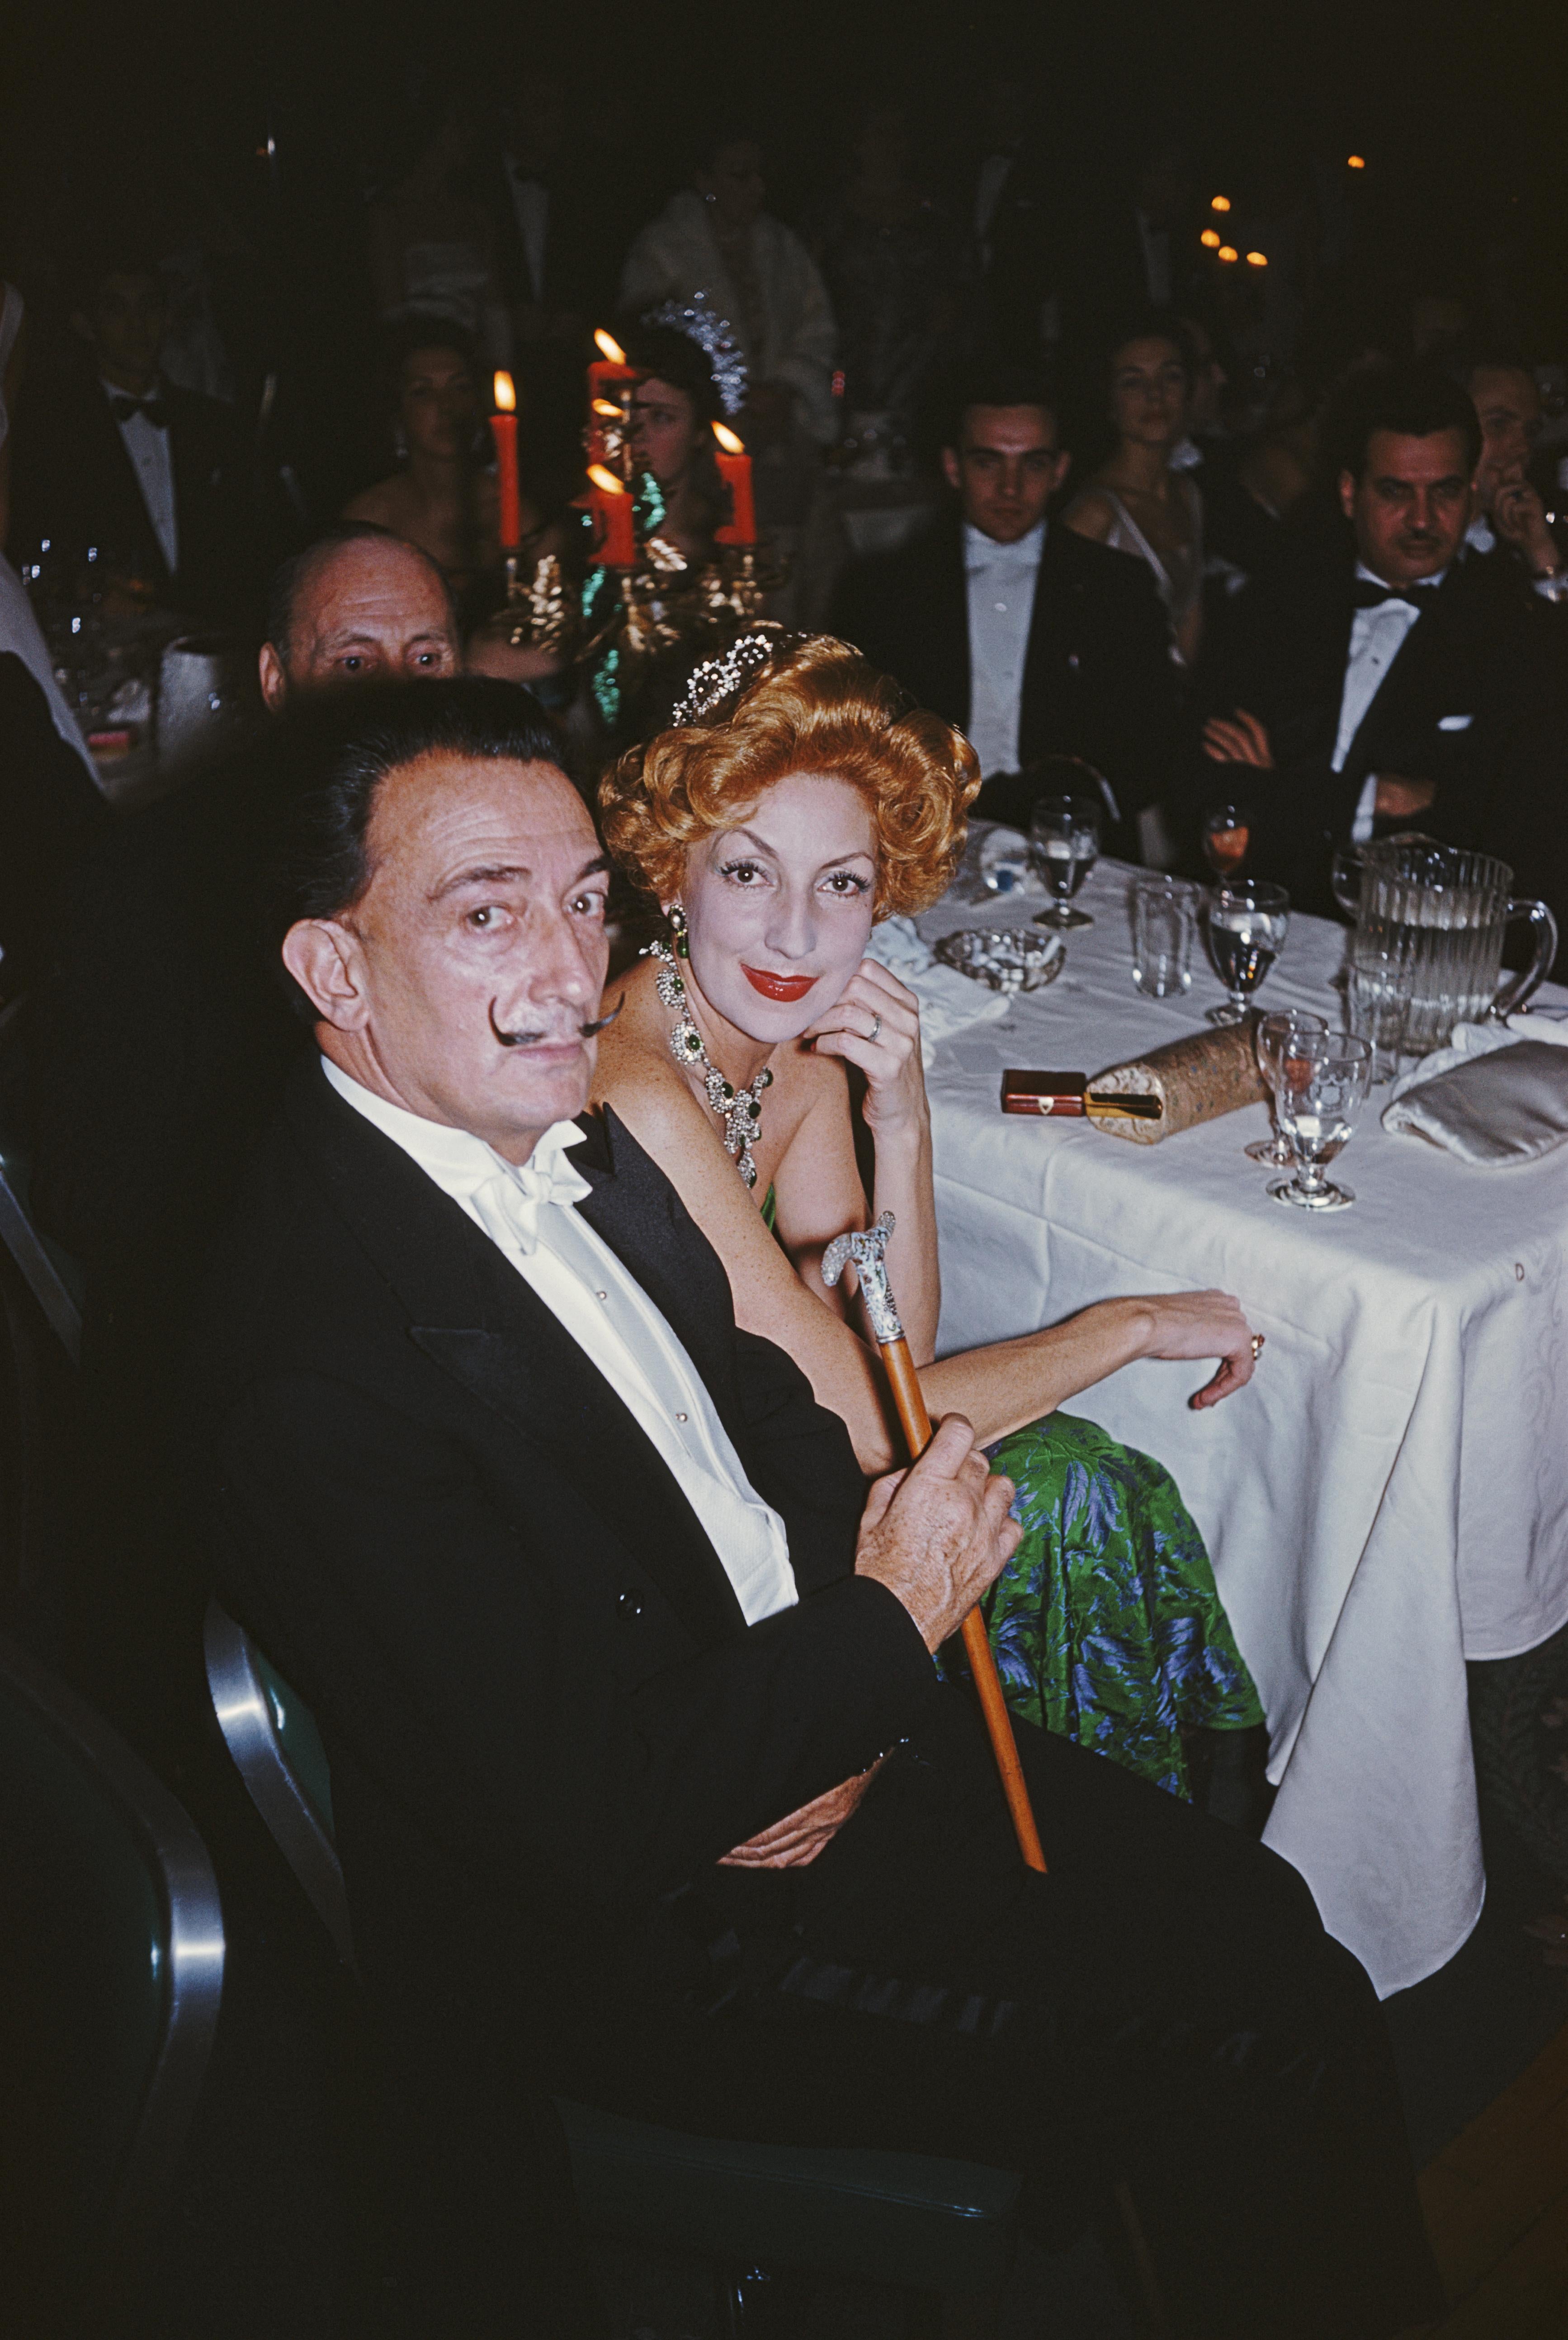 Slim Aarons
Salvador Dali, 1959, Printed Later
Lambda C-print
Estate Edition of 150

circa 1959: Surrealist painter Salvador Dali (1904 - 1989) with a red-haired woman at a ball in New York. A Wonderful Time - Slim Aarons


Estate stamped and hand